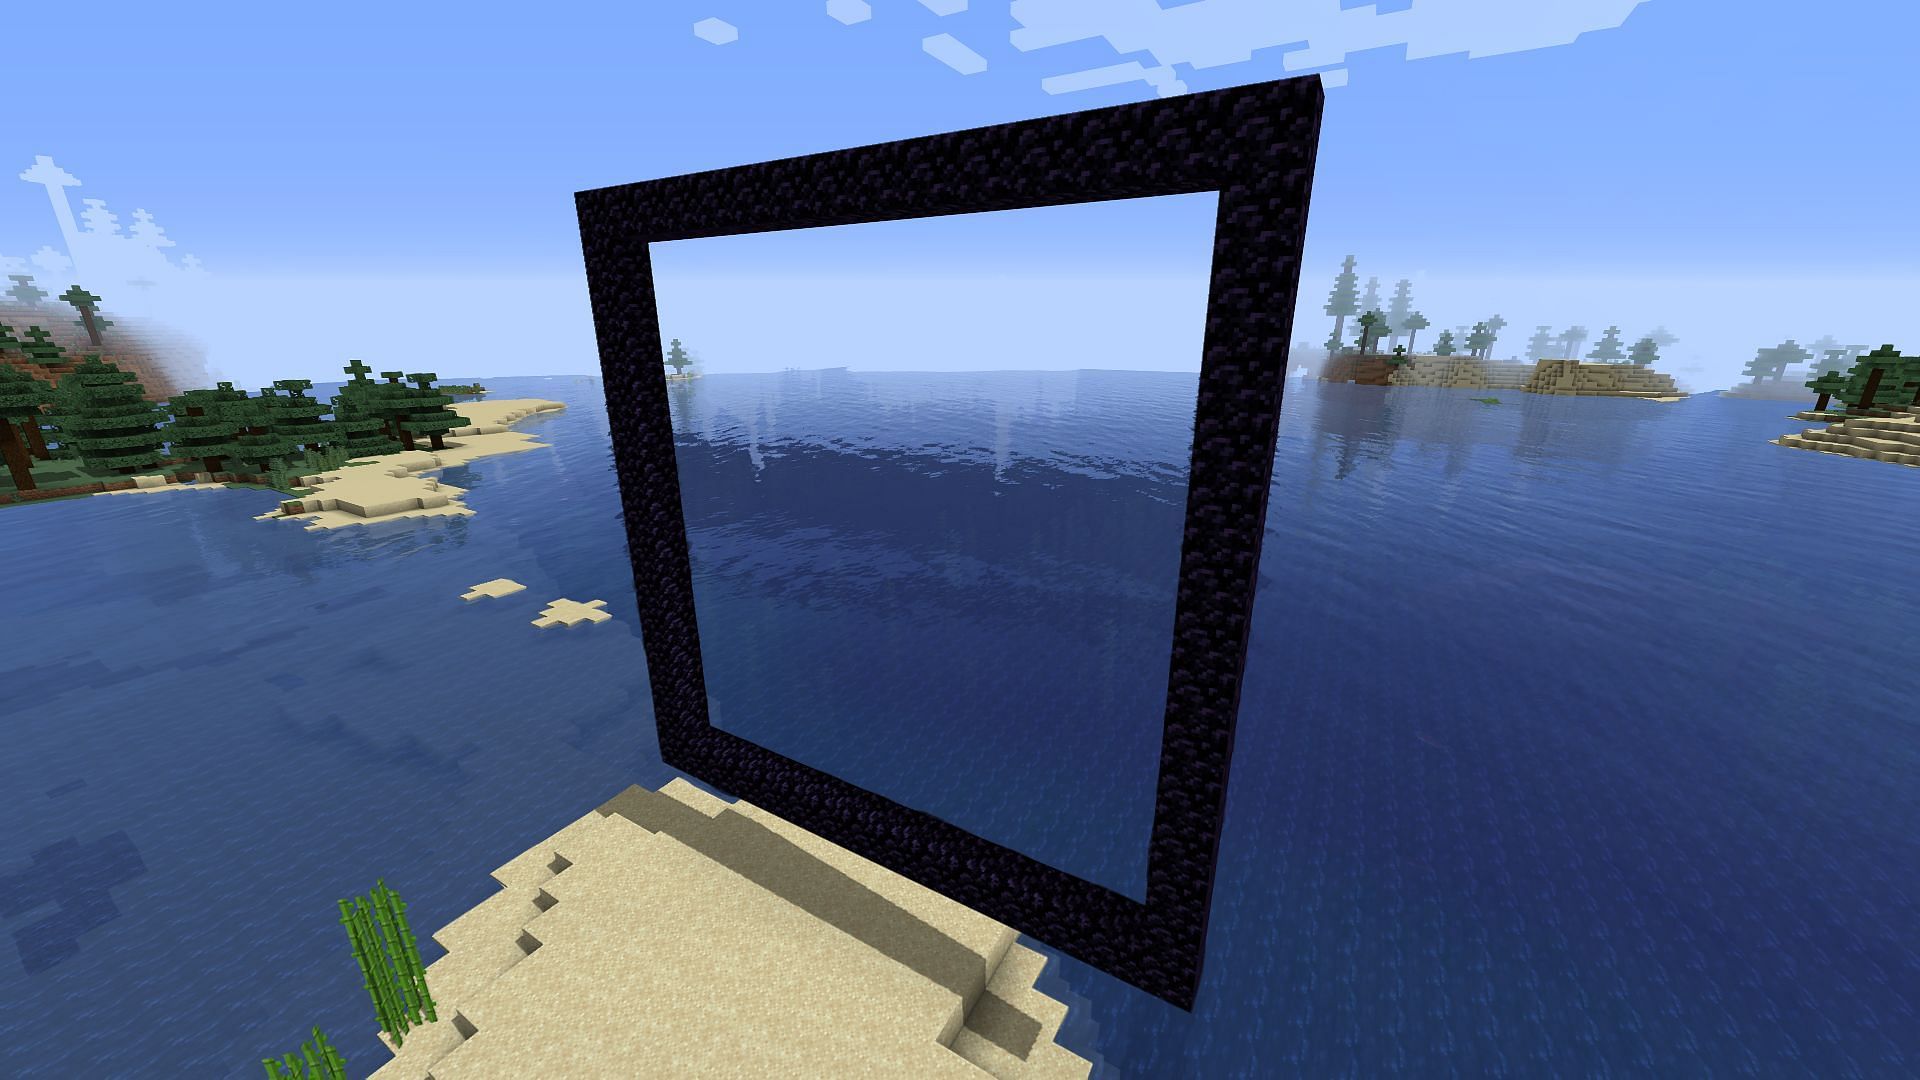 Minecraft please explain why I spawned on a floating platform above water  when I left the nether. : r/Minecraft